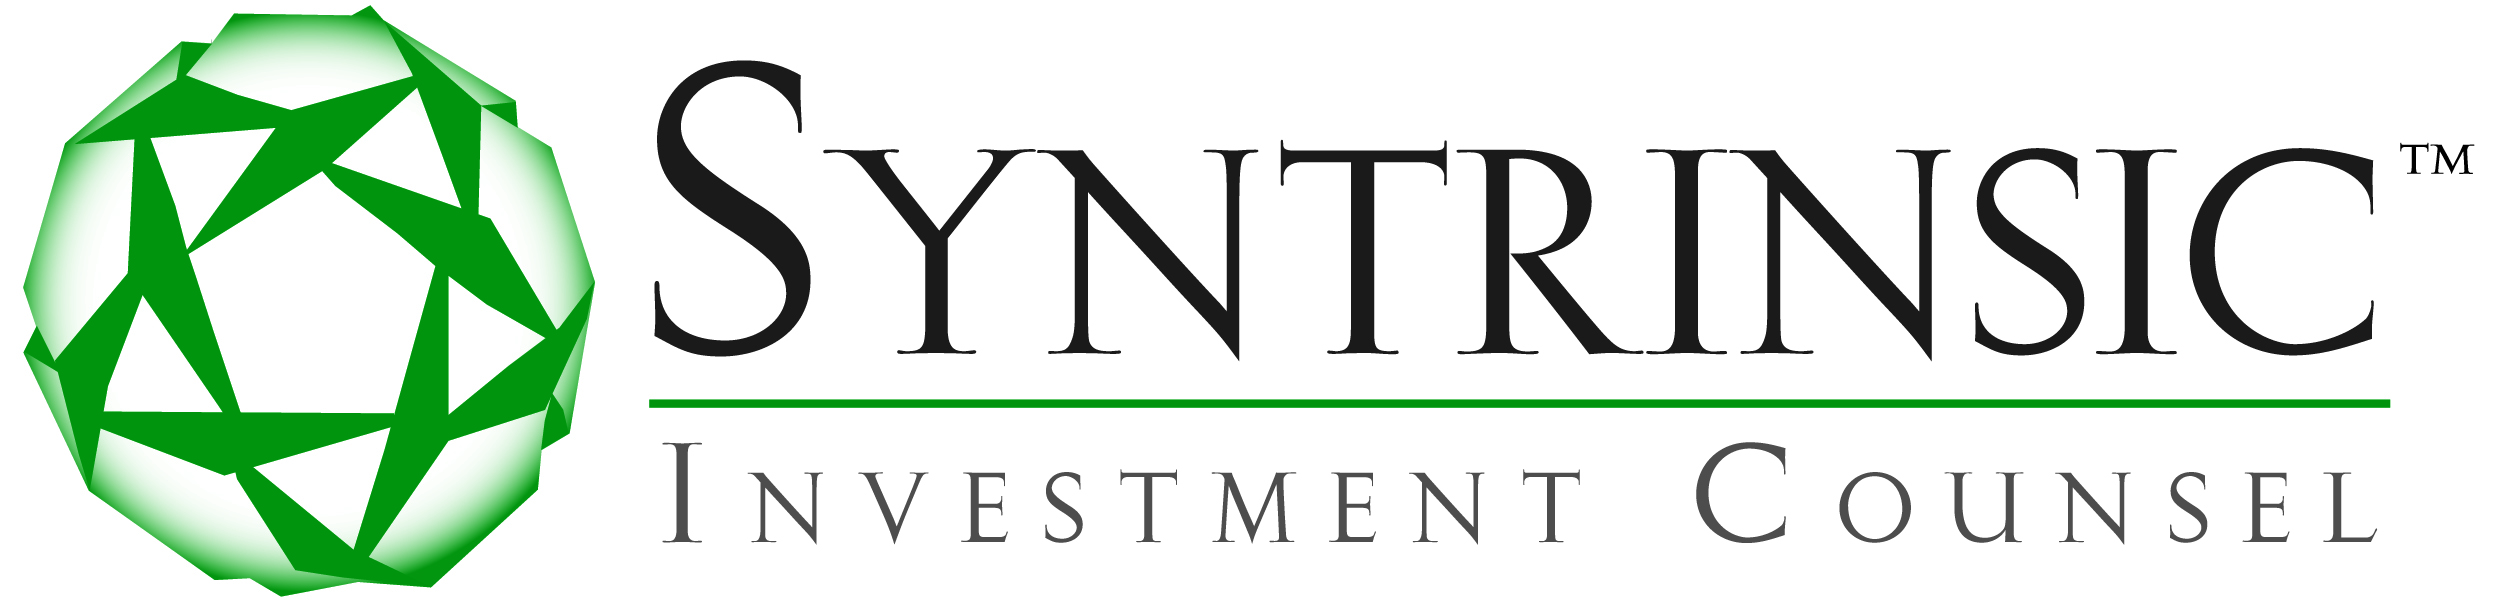 Syntrinsic Investment Counsel